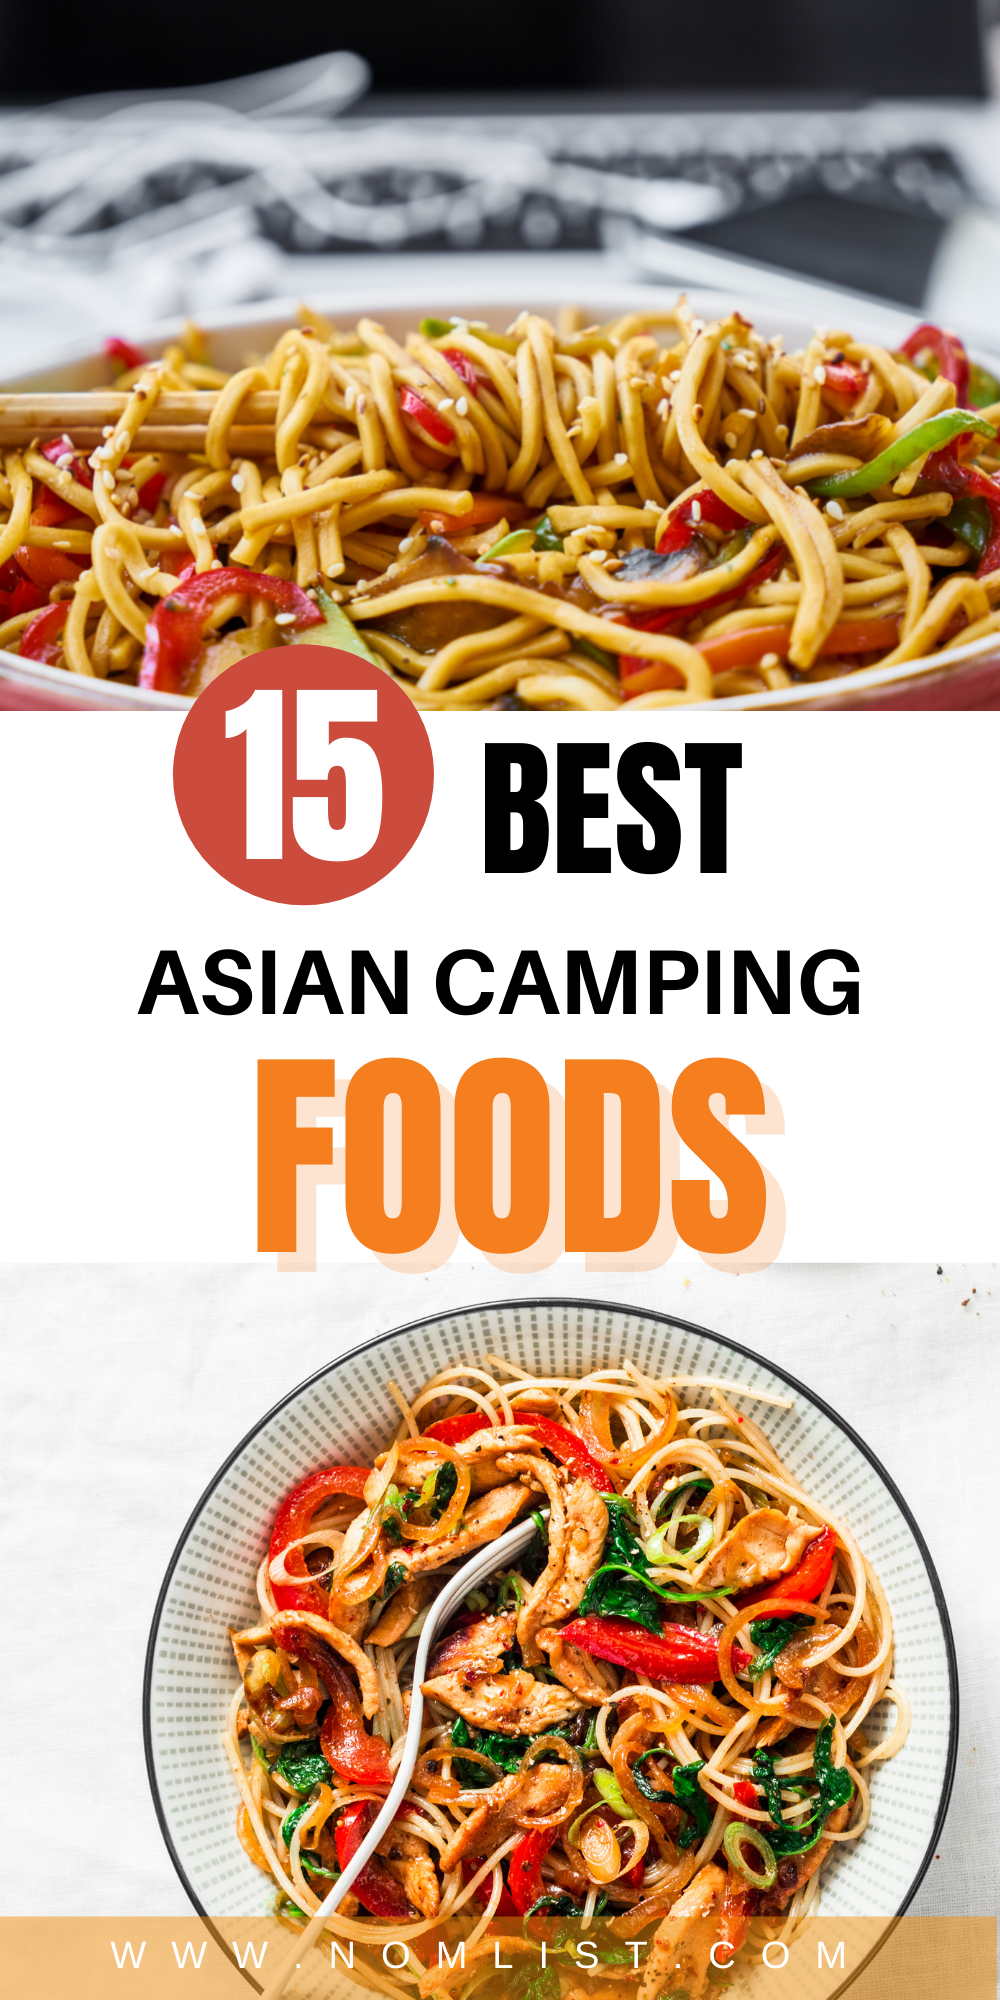 Feeling like camping but want to switch of the menu with a little Asian flare? These are some of the best Asian camping foods that will change the way you eat outdoors. Enjoy some of these amazing stir-fry recipes and noodle dishes that are easy to make while camping!